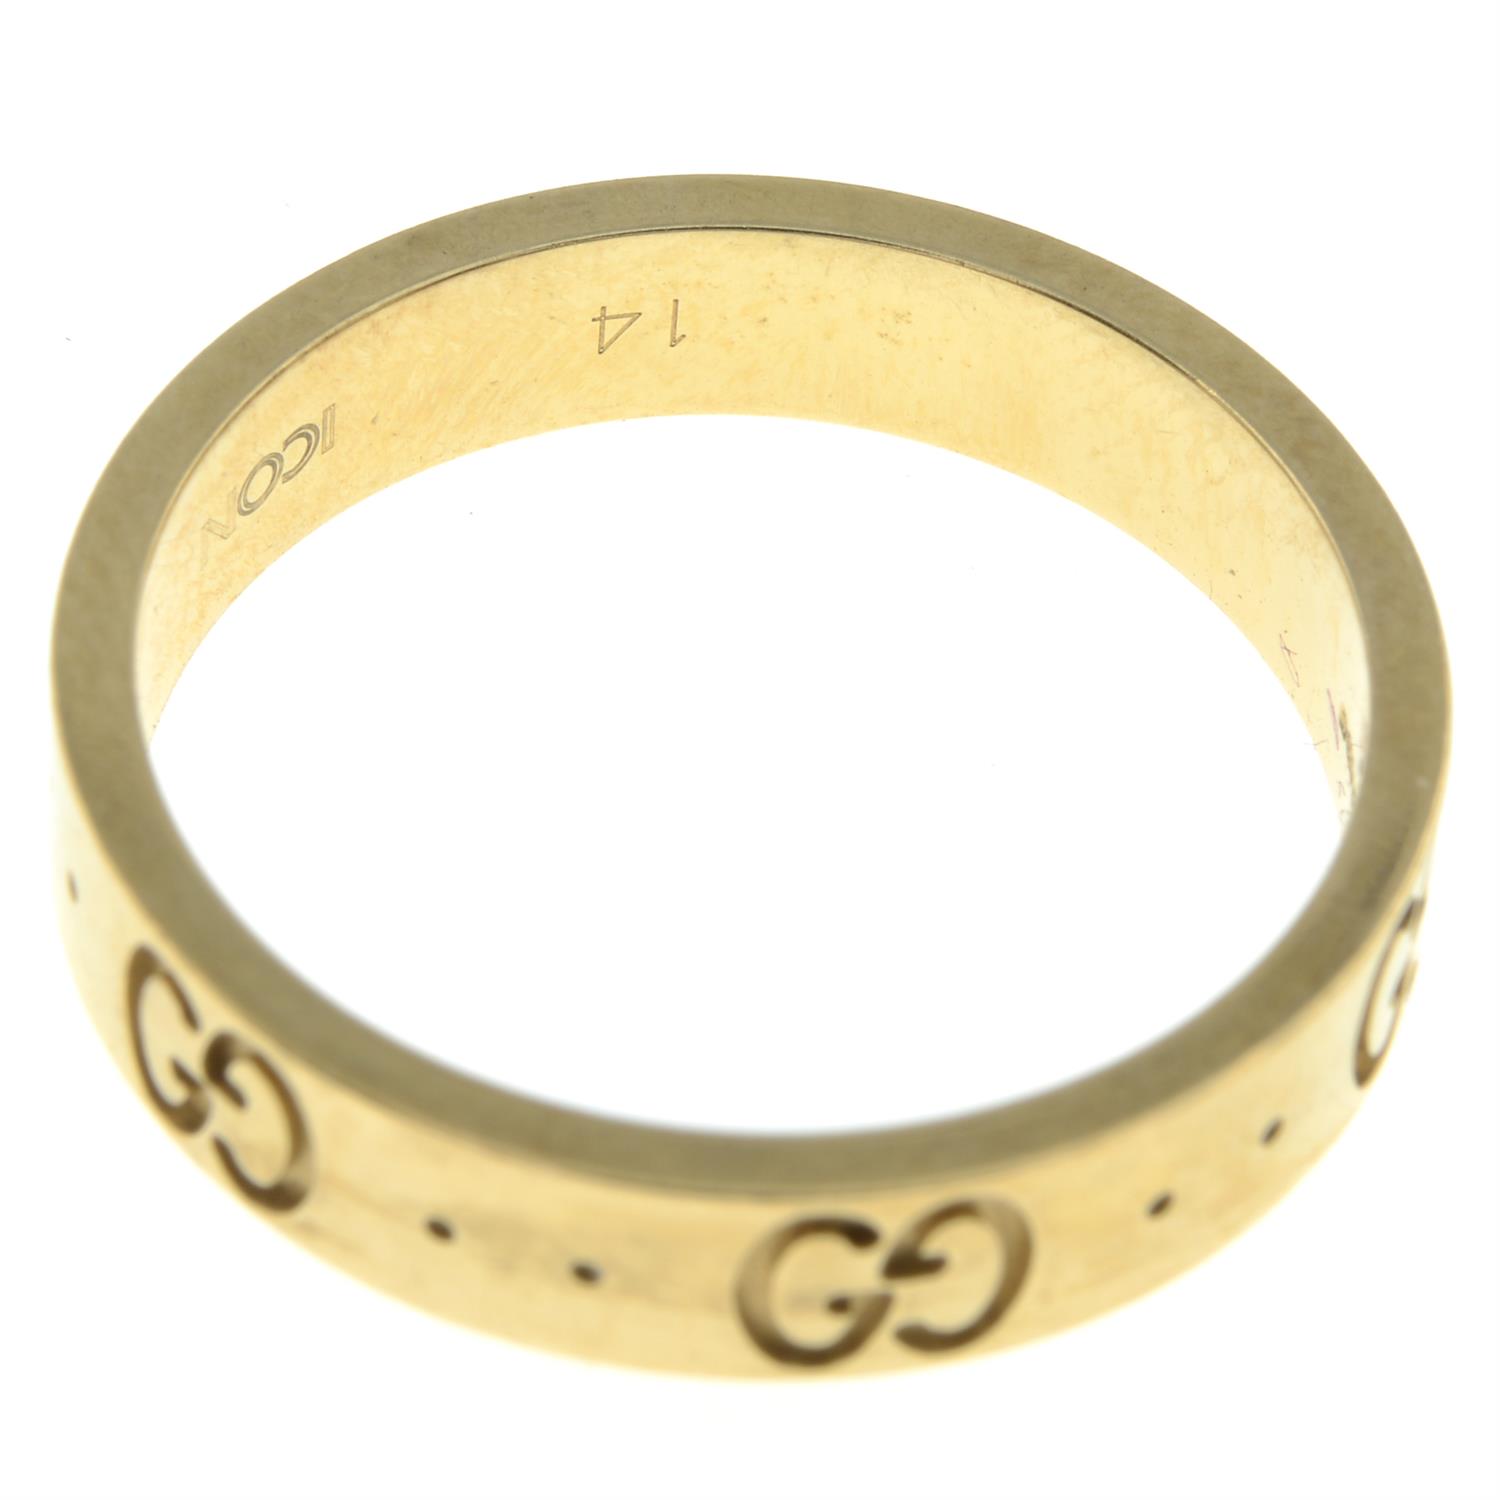 18ct gold 'Icon' band ring, by Gucci - Image 2 of 2